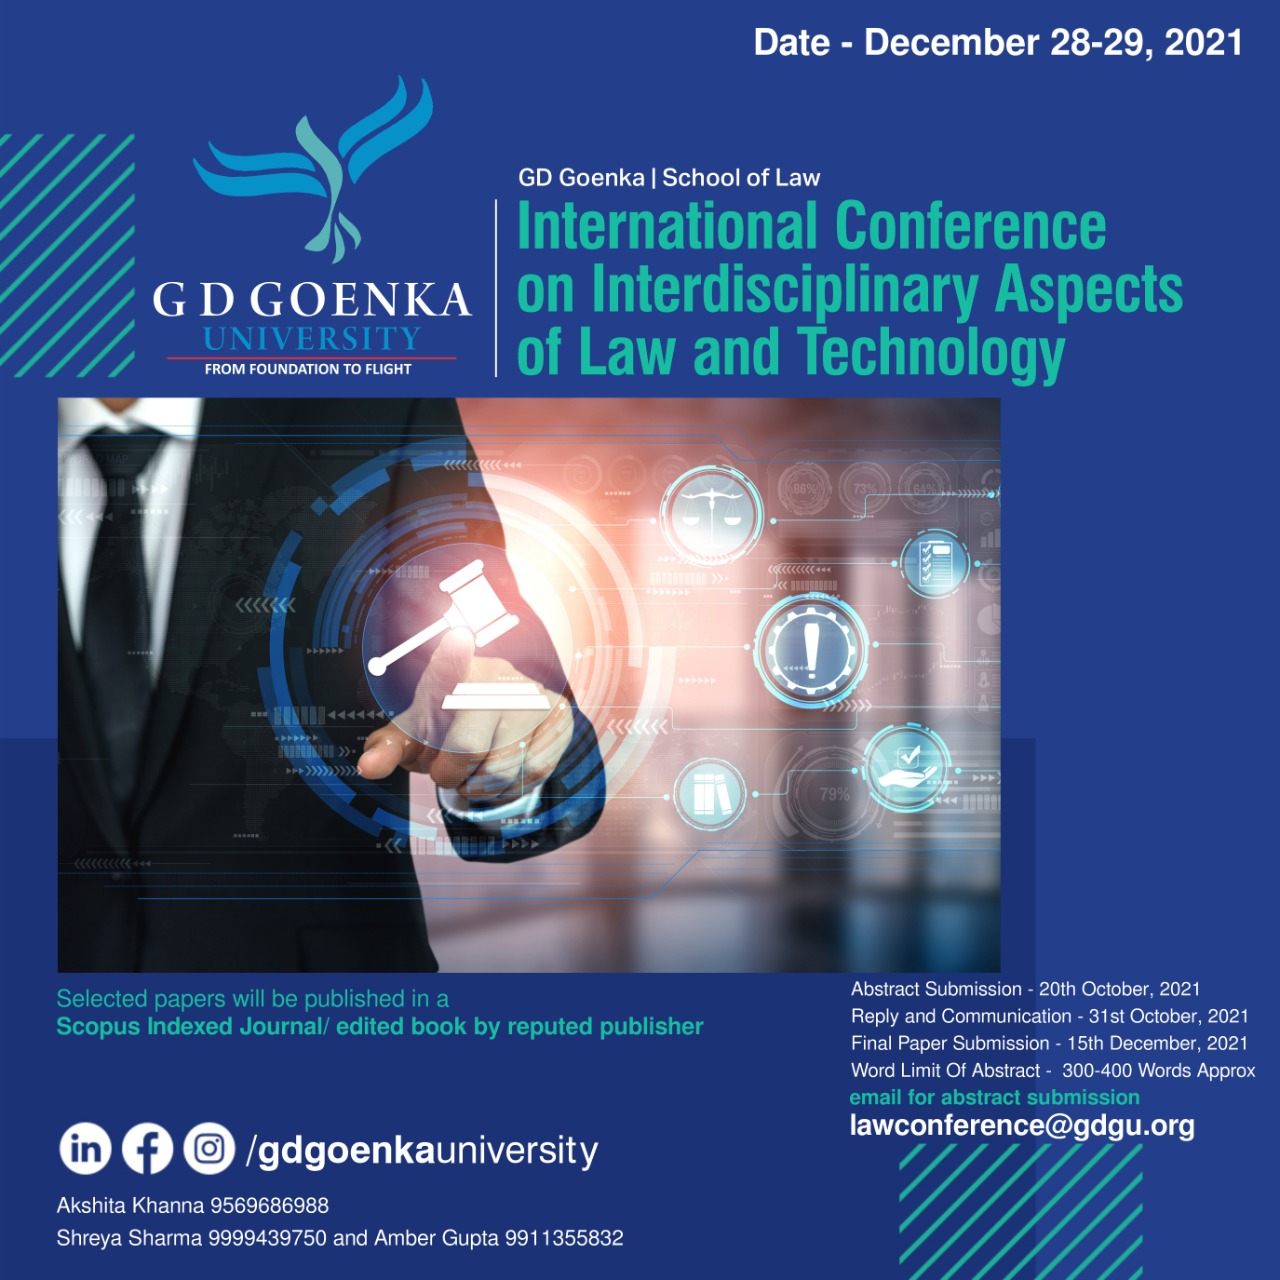 International Virtual Conference on Interdisciplinary Aspects of Law and Technology on 28th and 29th December 2021 by GD Goenka University